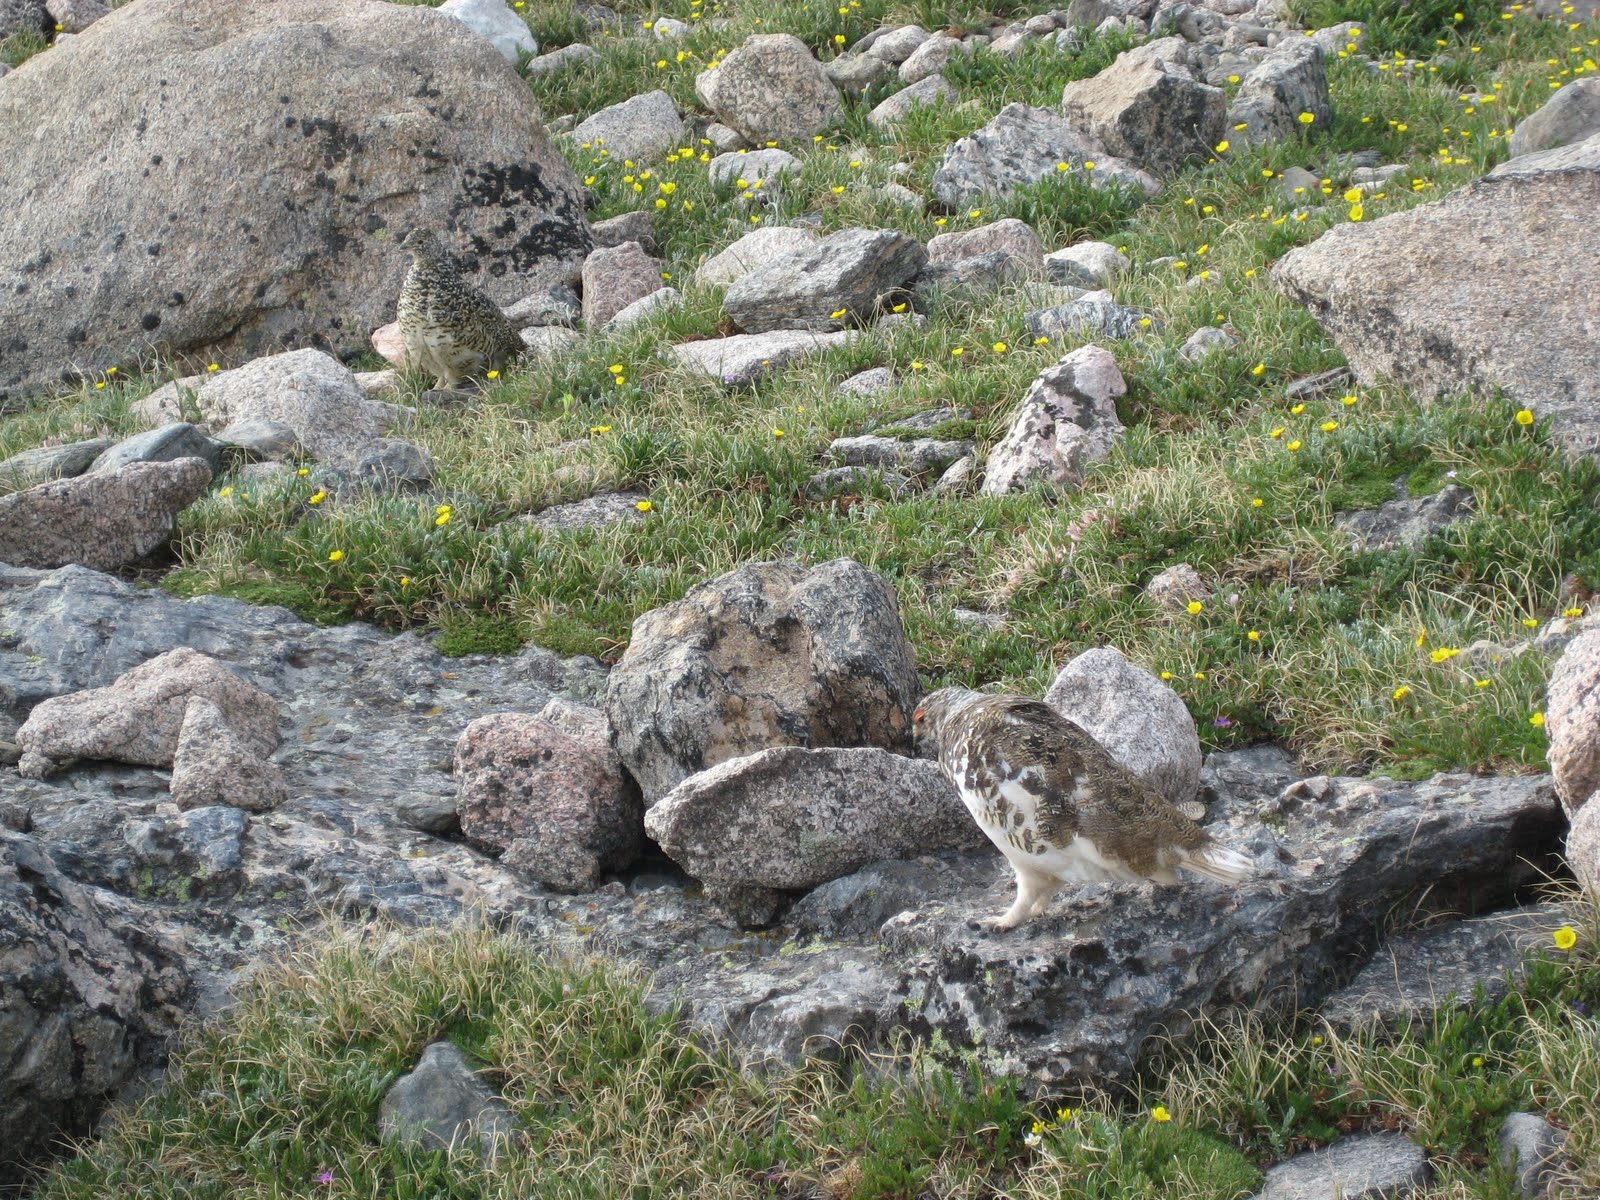 Nature's camouflage - can you find the Ptarmigan? | Leave No Trace